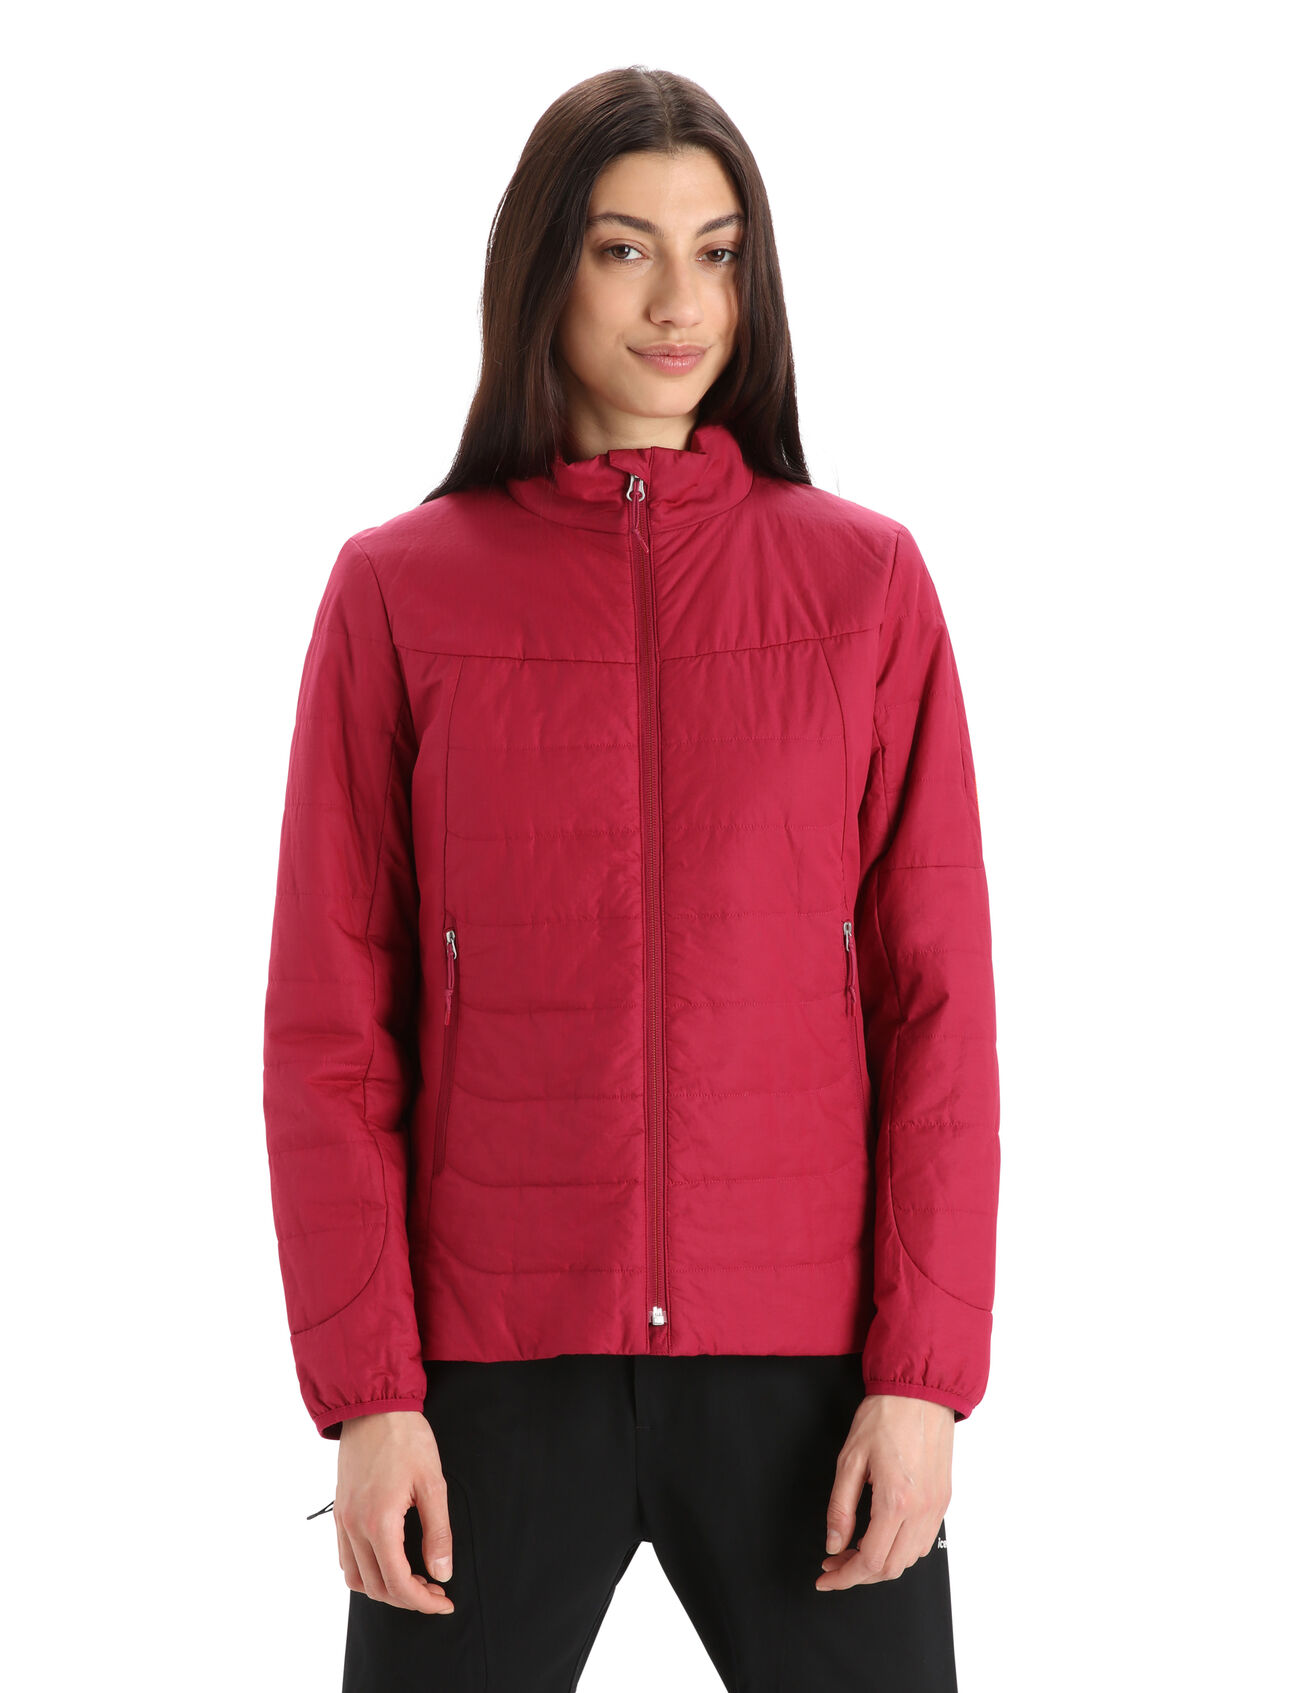 Womens MerinoLoft™ Jacket The perfect insulating layer for skiing or hiking in cold conditions, the MerinoLoft™ Jacket features our innovative MerinoLoft™ insulation—a natural and cruelty-free insulation that harnesses the natural benefits of merino wool.